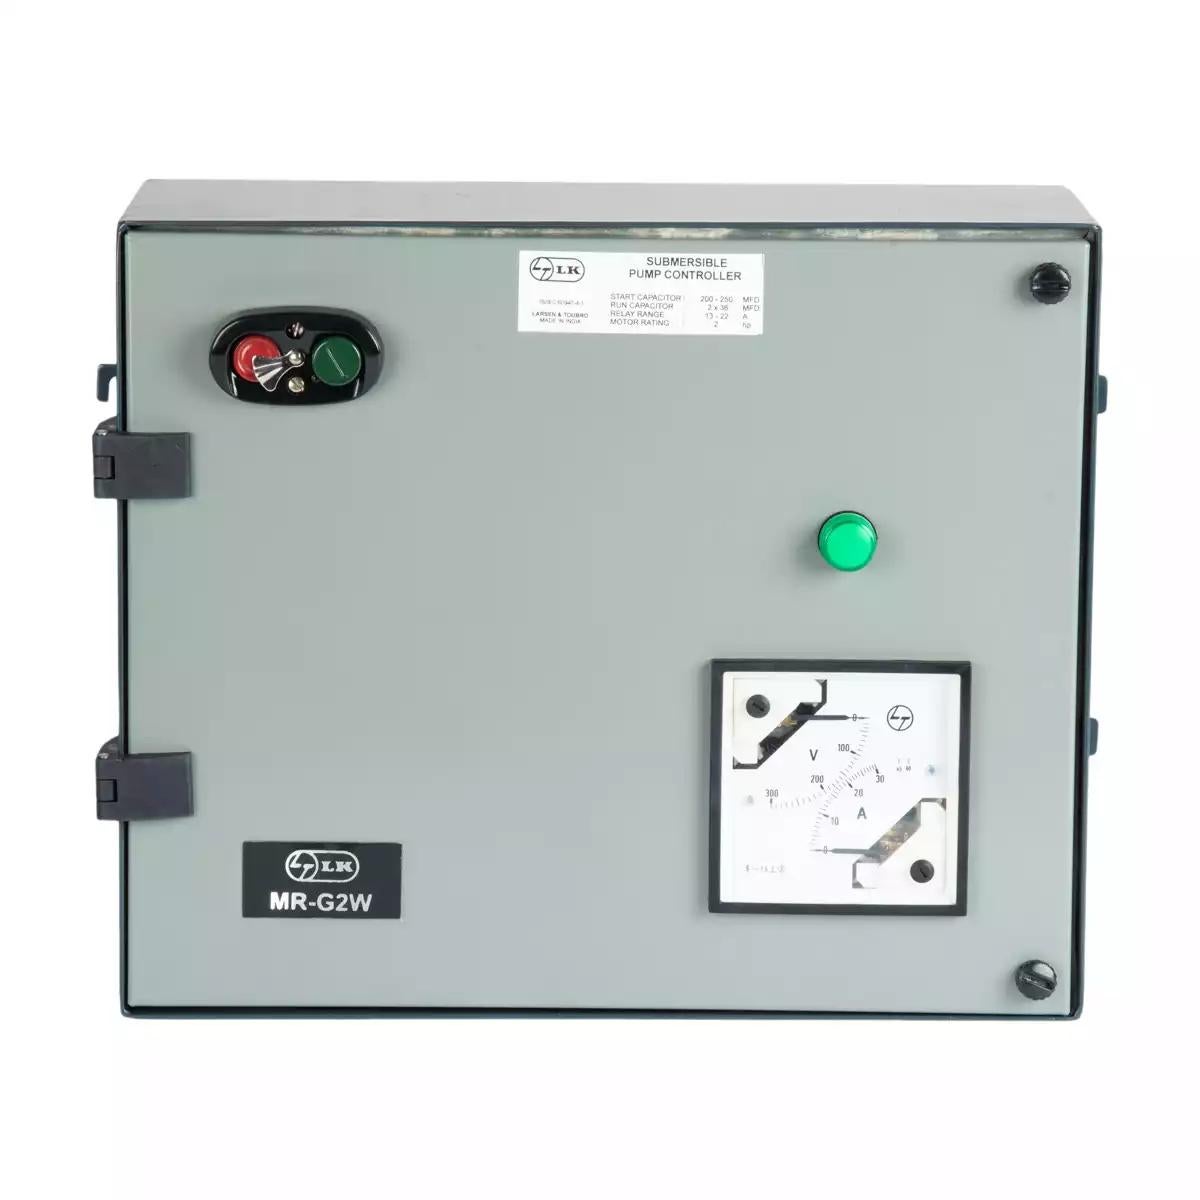 Single Phase Controller with WLC for Submersible Pump Application,MR-G2W,0.5HP,80 / 100mfd,1 x 36mfd